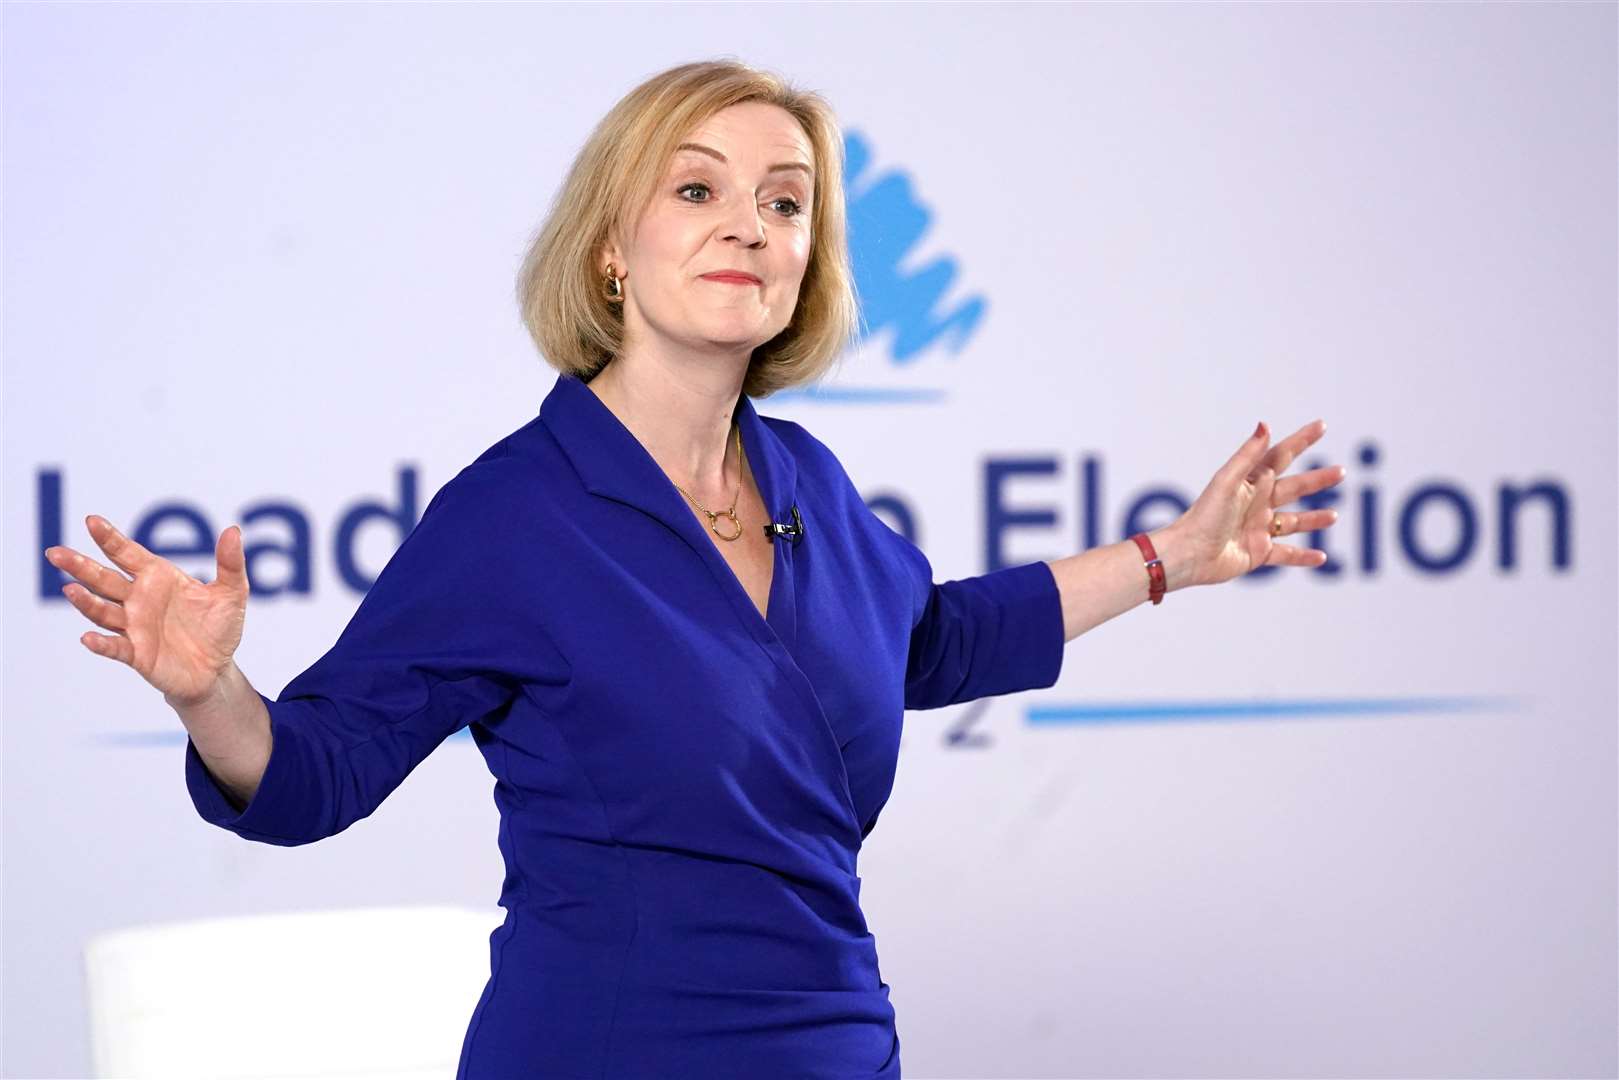 Liz Truss cancelled a face-to-face interview with BBC journalist Nick Robinson in the final hours of the leadership contest (Joe Giddens/PA)